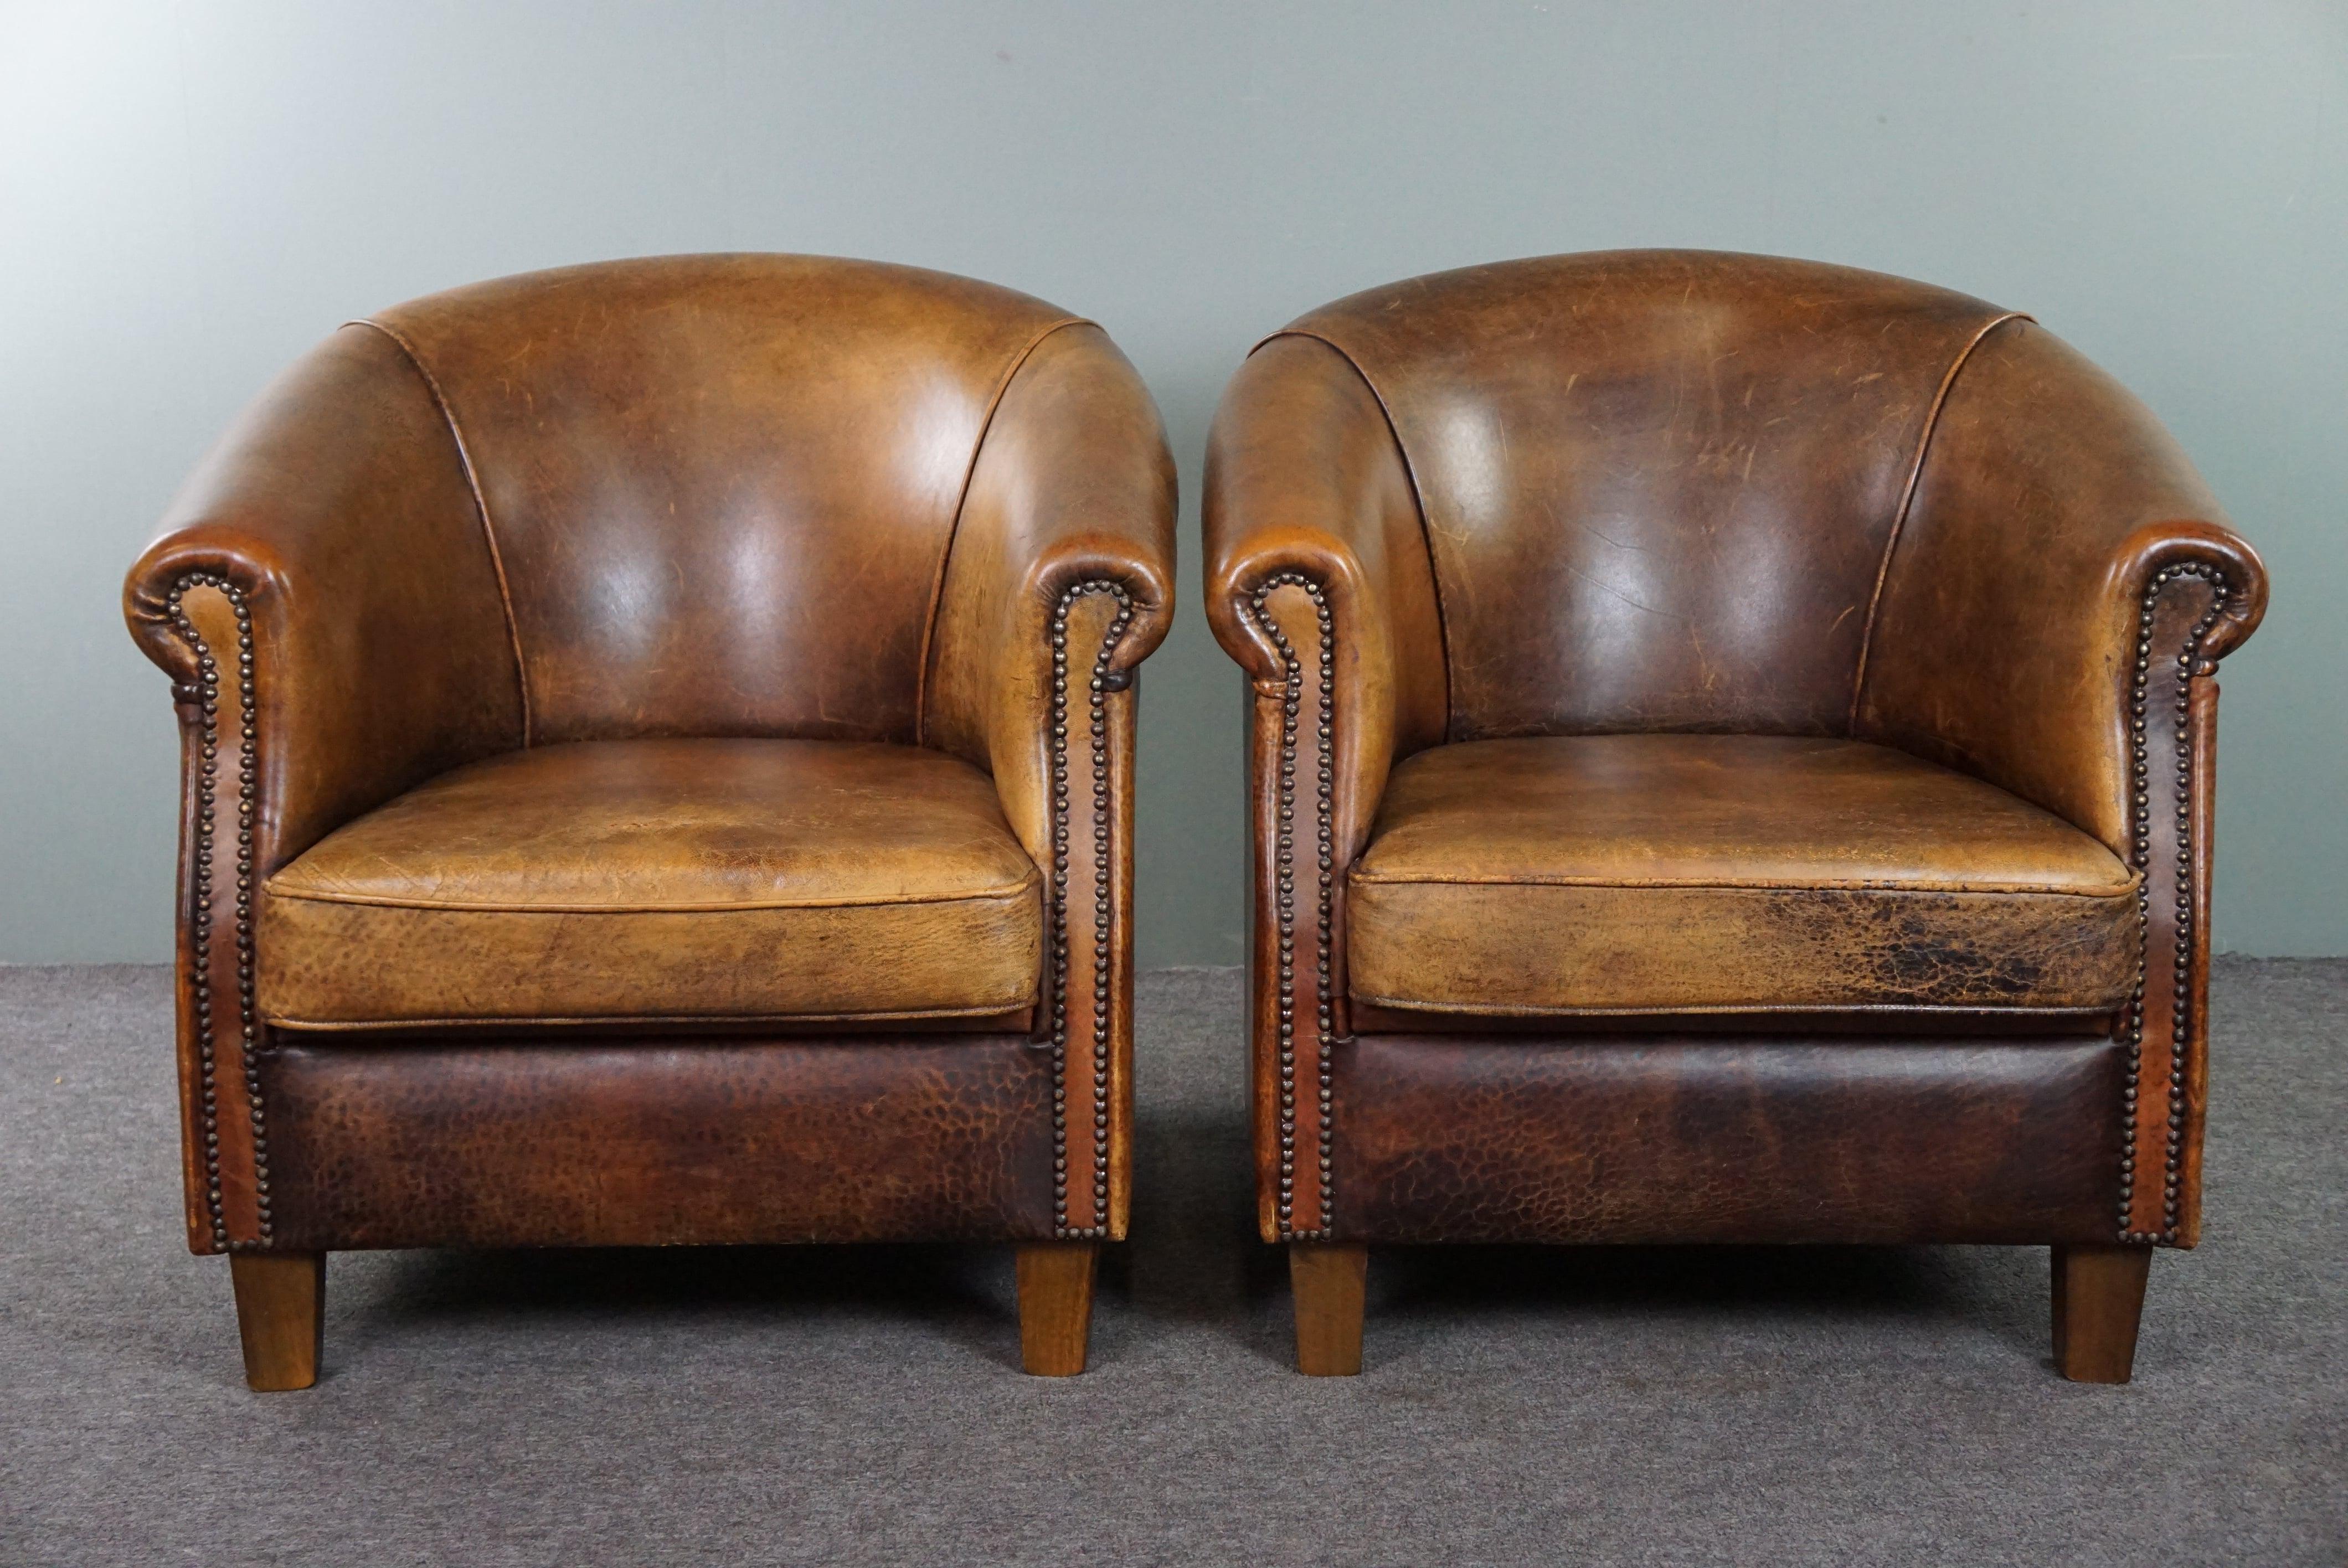 Offered is this cool set of two sturdy sheep leather club chairs in a beautiful dark cognac color and finished with nails.

This wonderful set of sturdy sheep leather armchairs with experience have already had a life behind them but are also looking